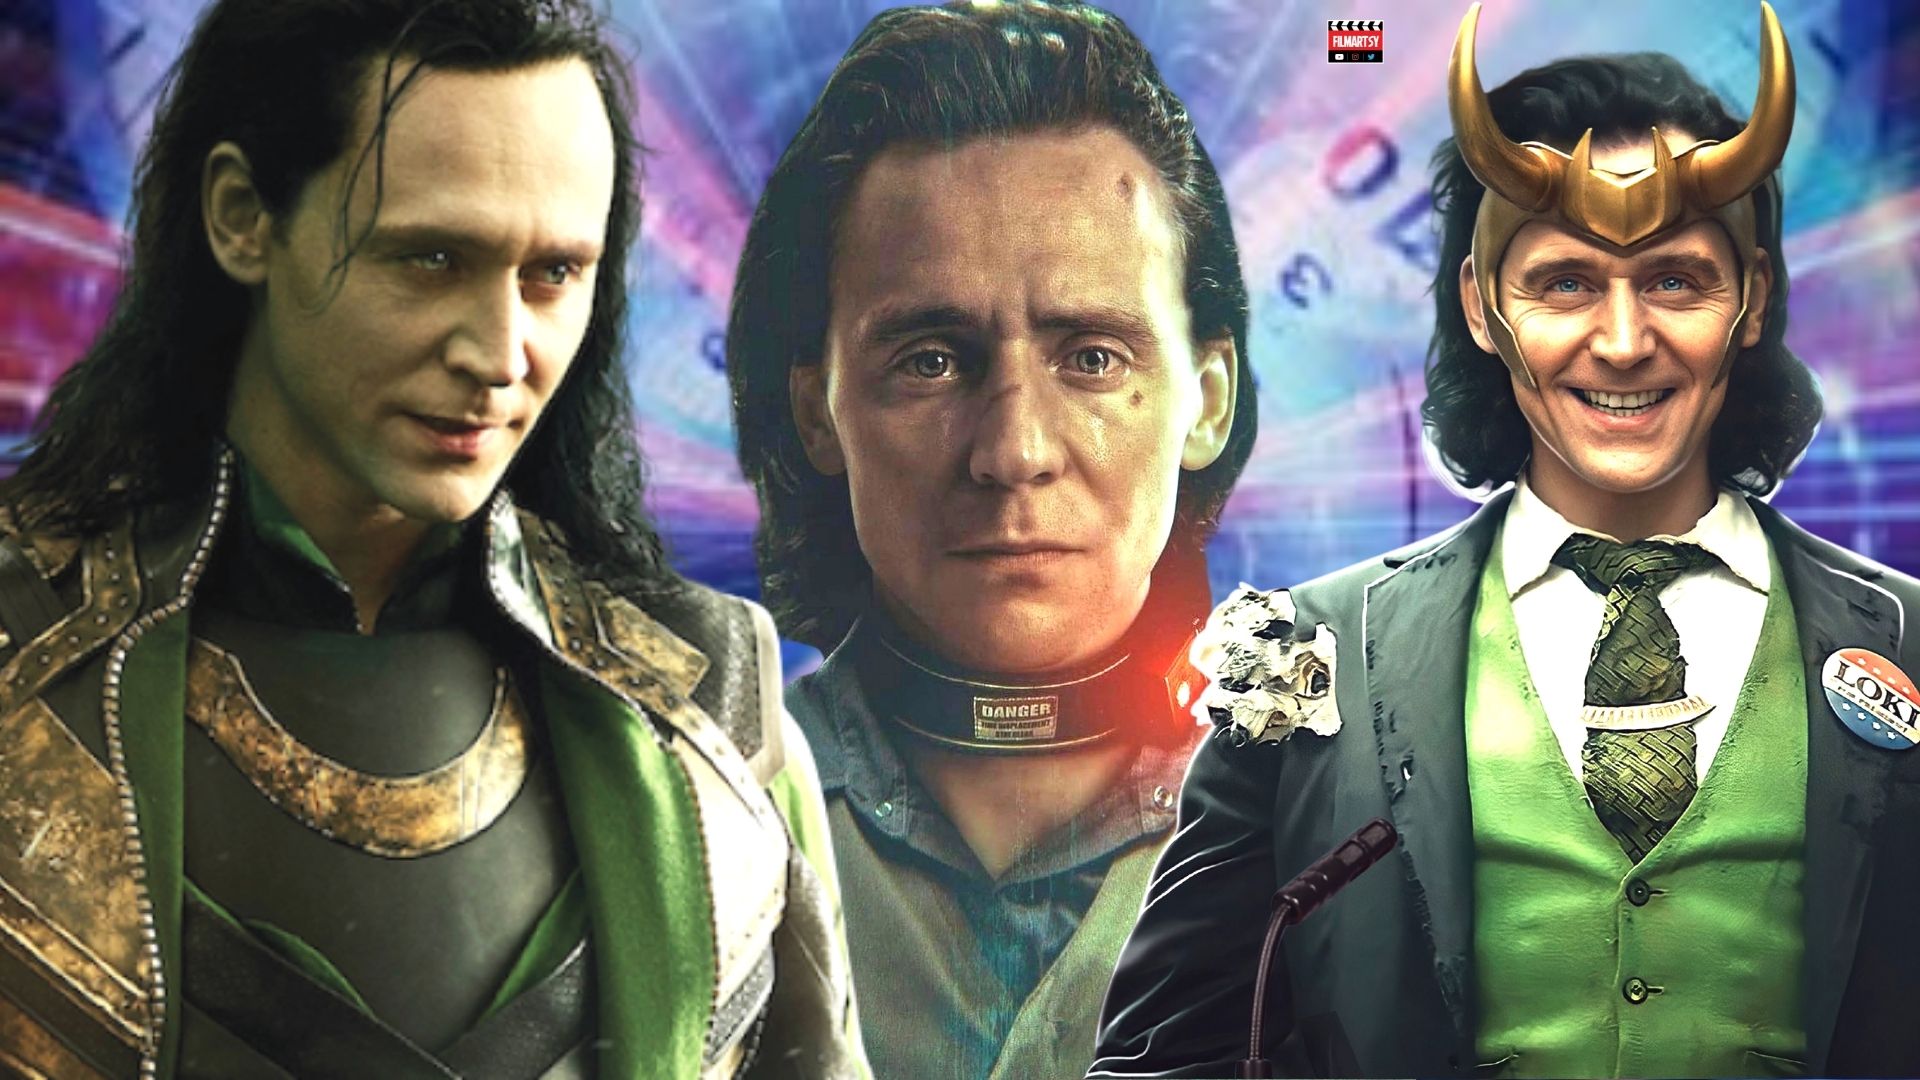 Tom hiddleston reacts to multiple lokis in the mcu